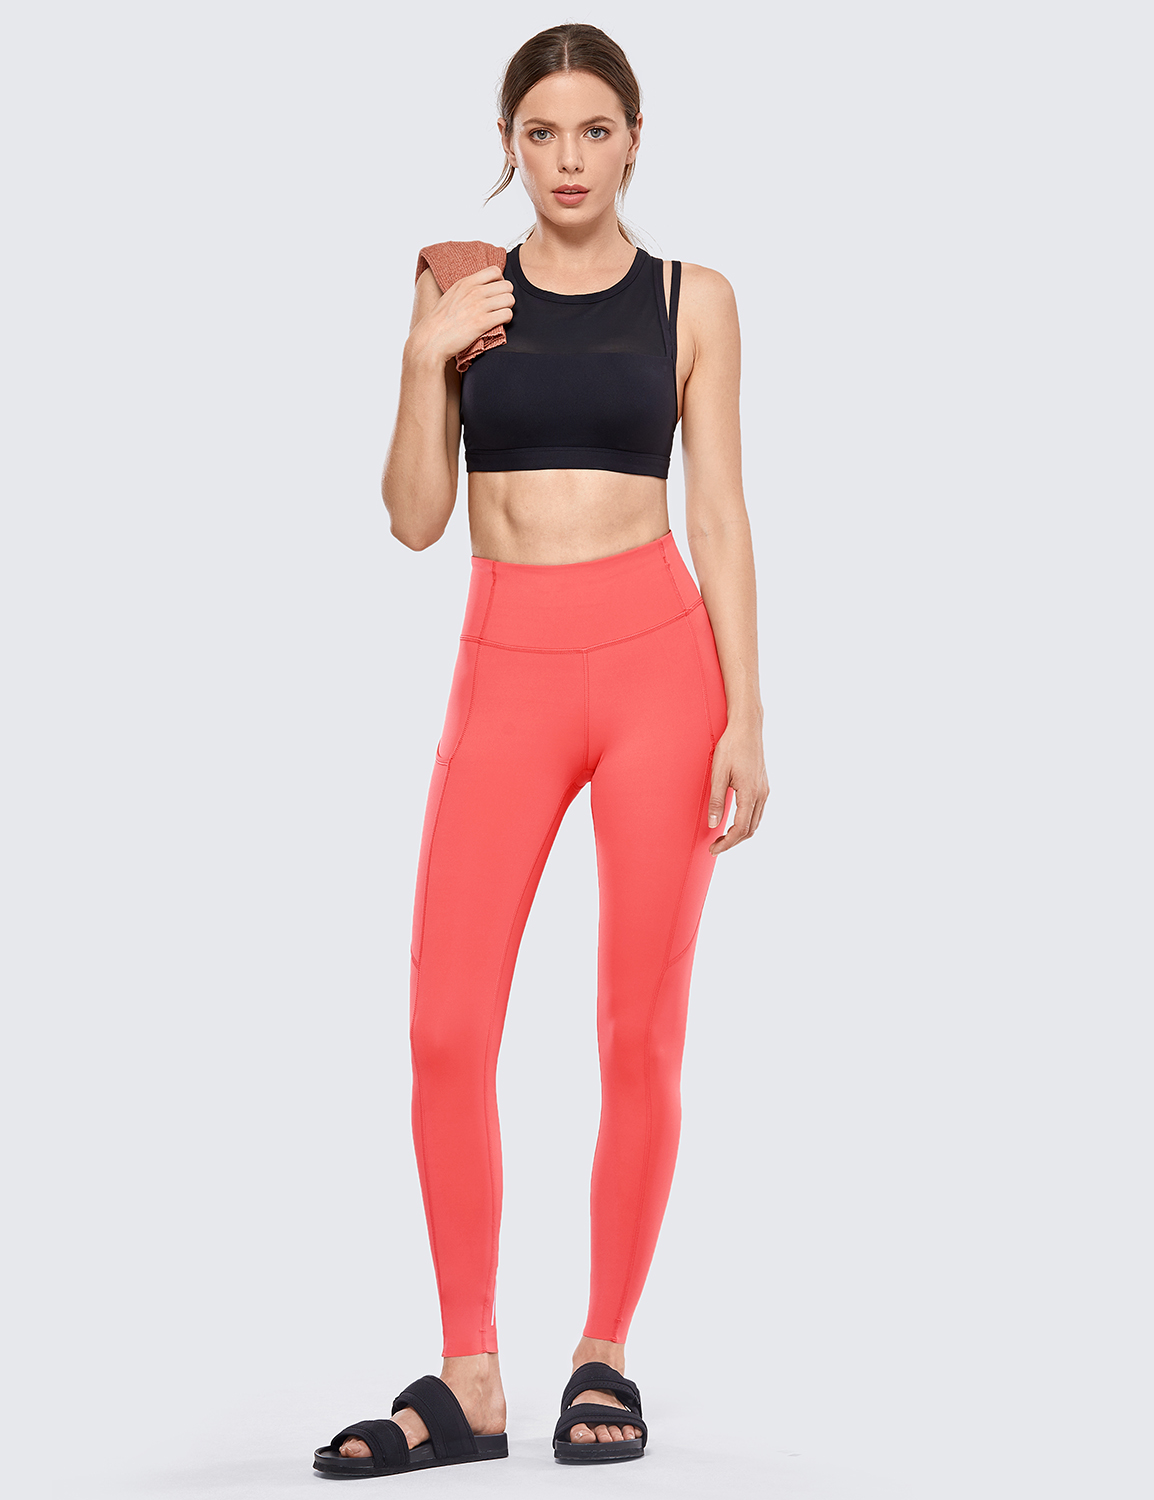 Crz yoga has emerged as a popular choice for activewear enthusiasts, offering a wide range of stylish and functional apparel designed